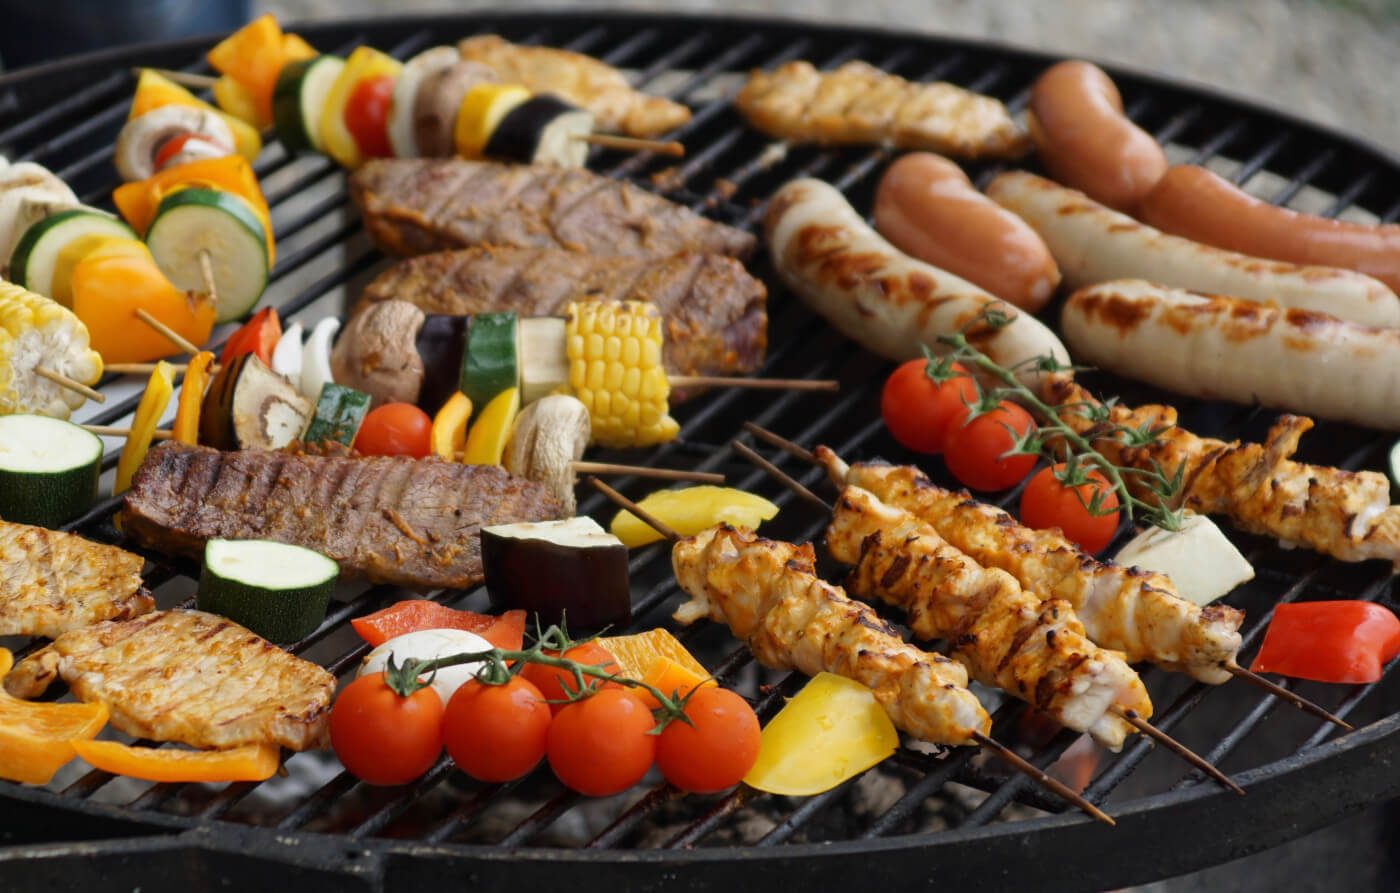 10 Easy Ways to Host a Sustainable BBQ this Summer